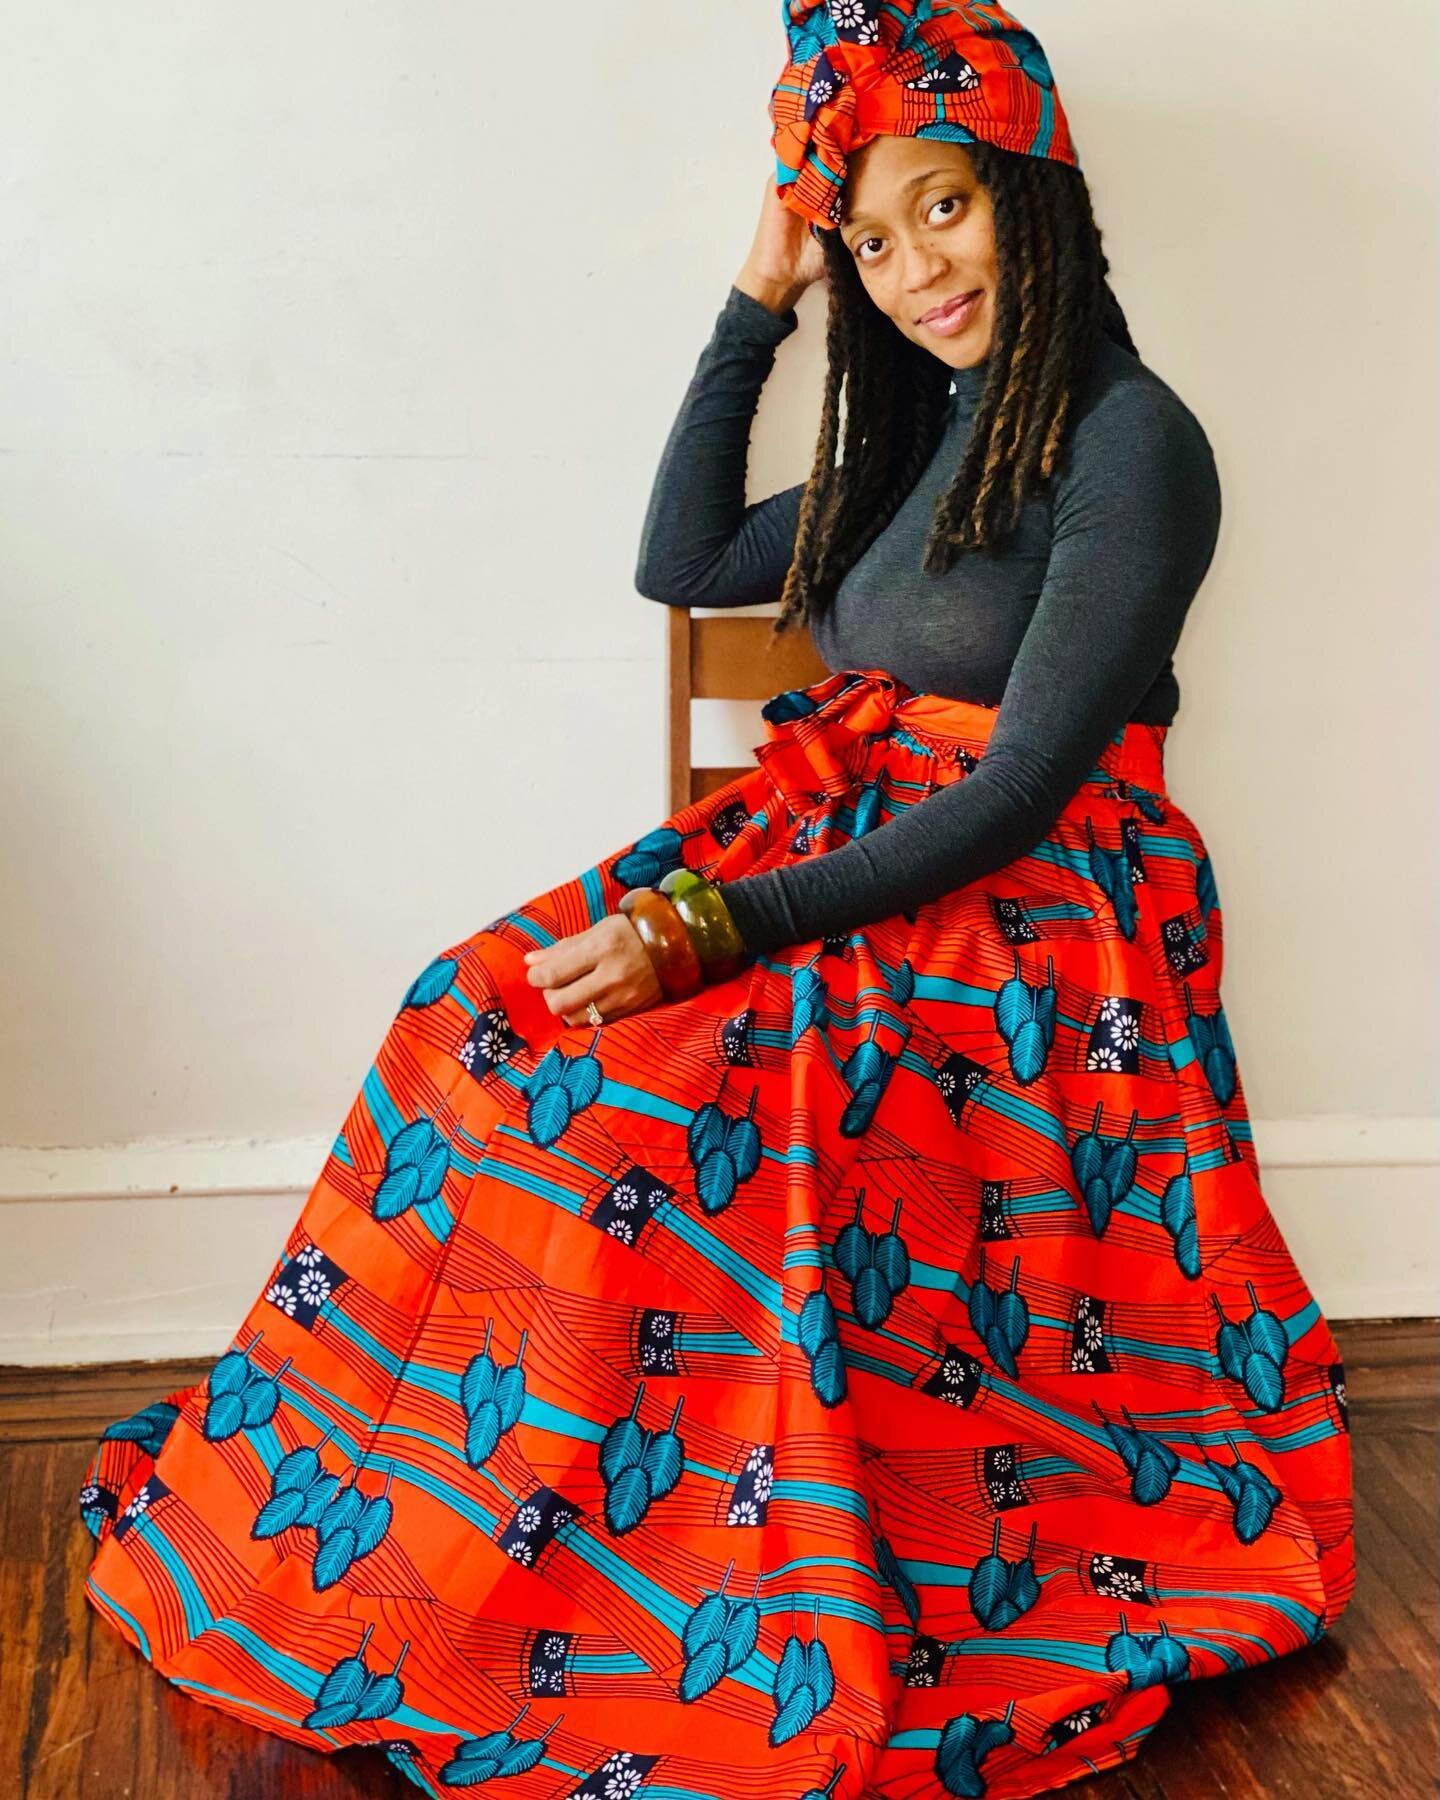 So excited to get my first @shop.setapart box which included this skirt and headwrap!! Due to the size of the skirt, they were unable to use their signature box, but I added a photo of what your box will look like when you order in other months. 

Th